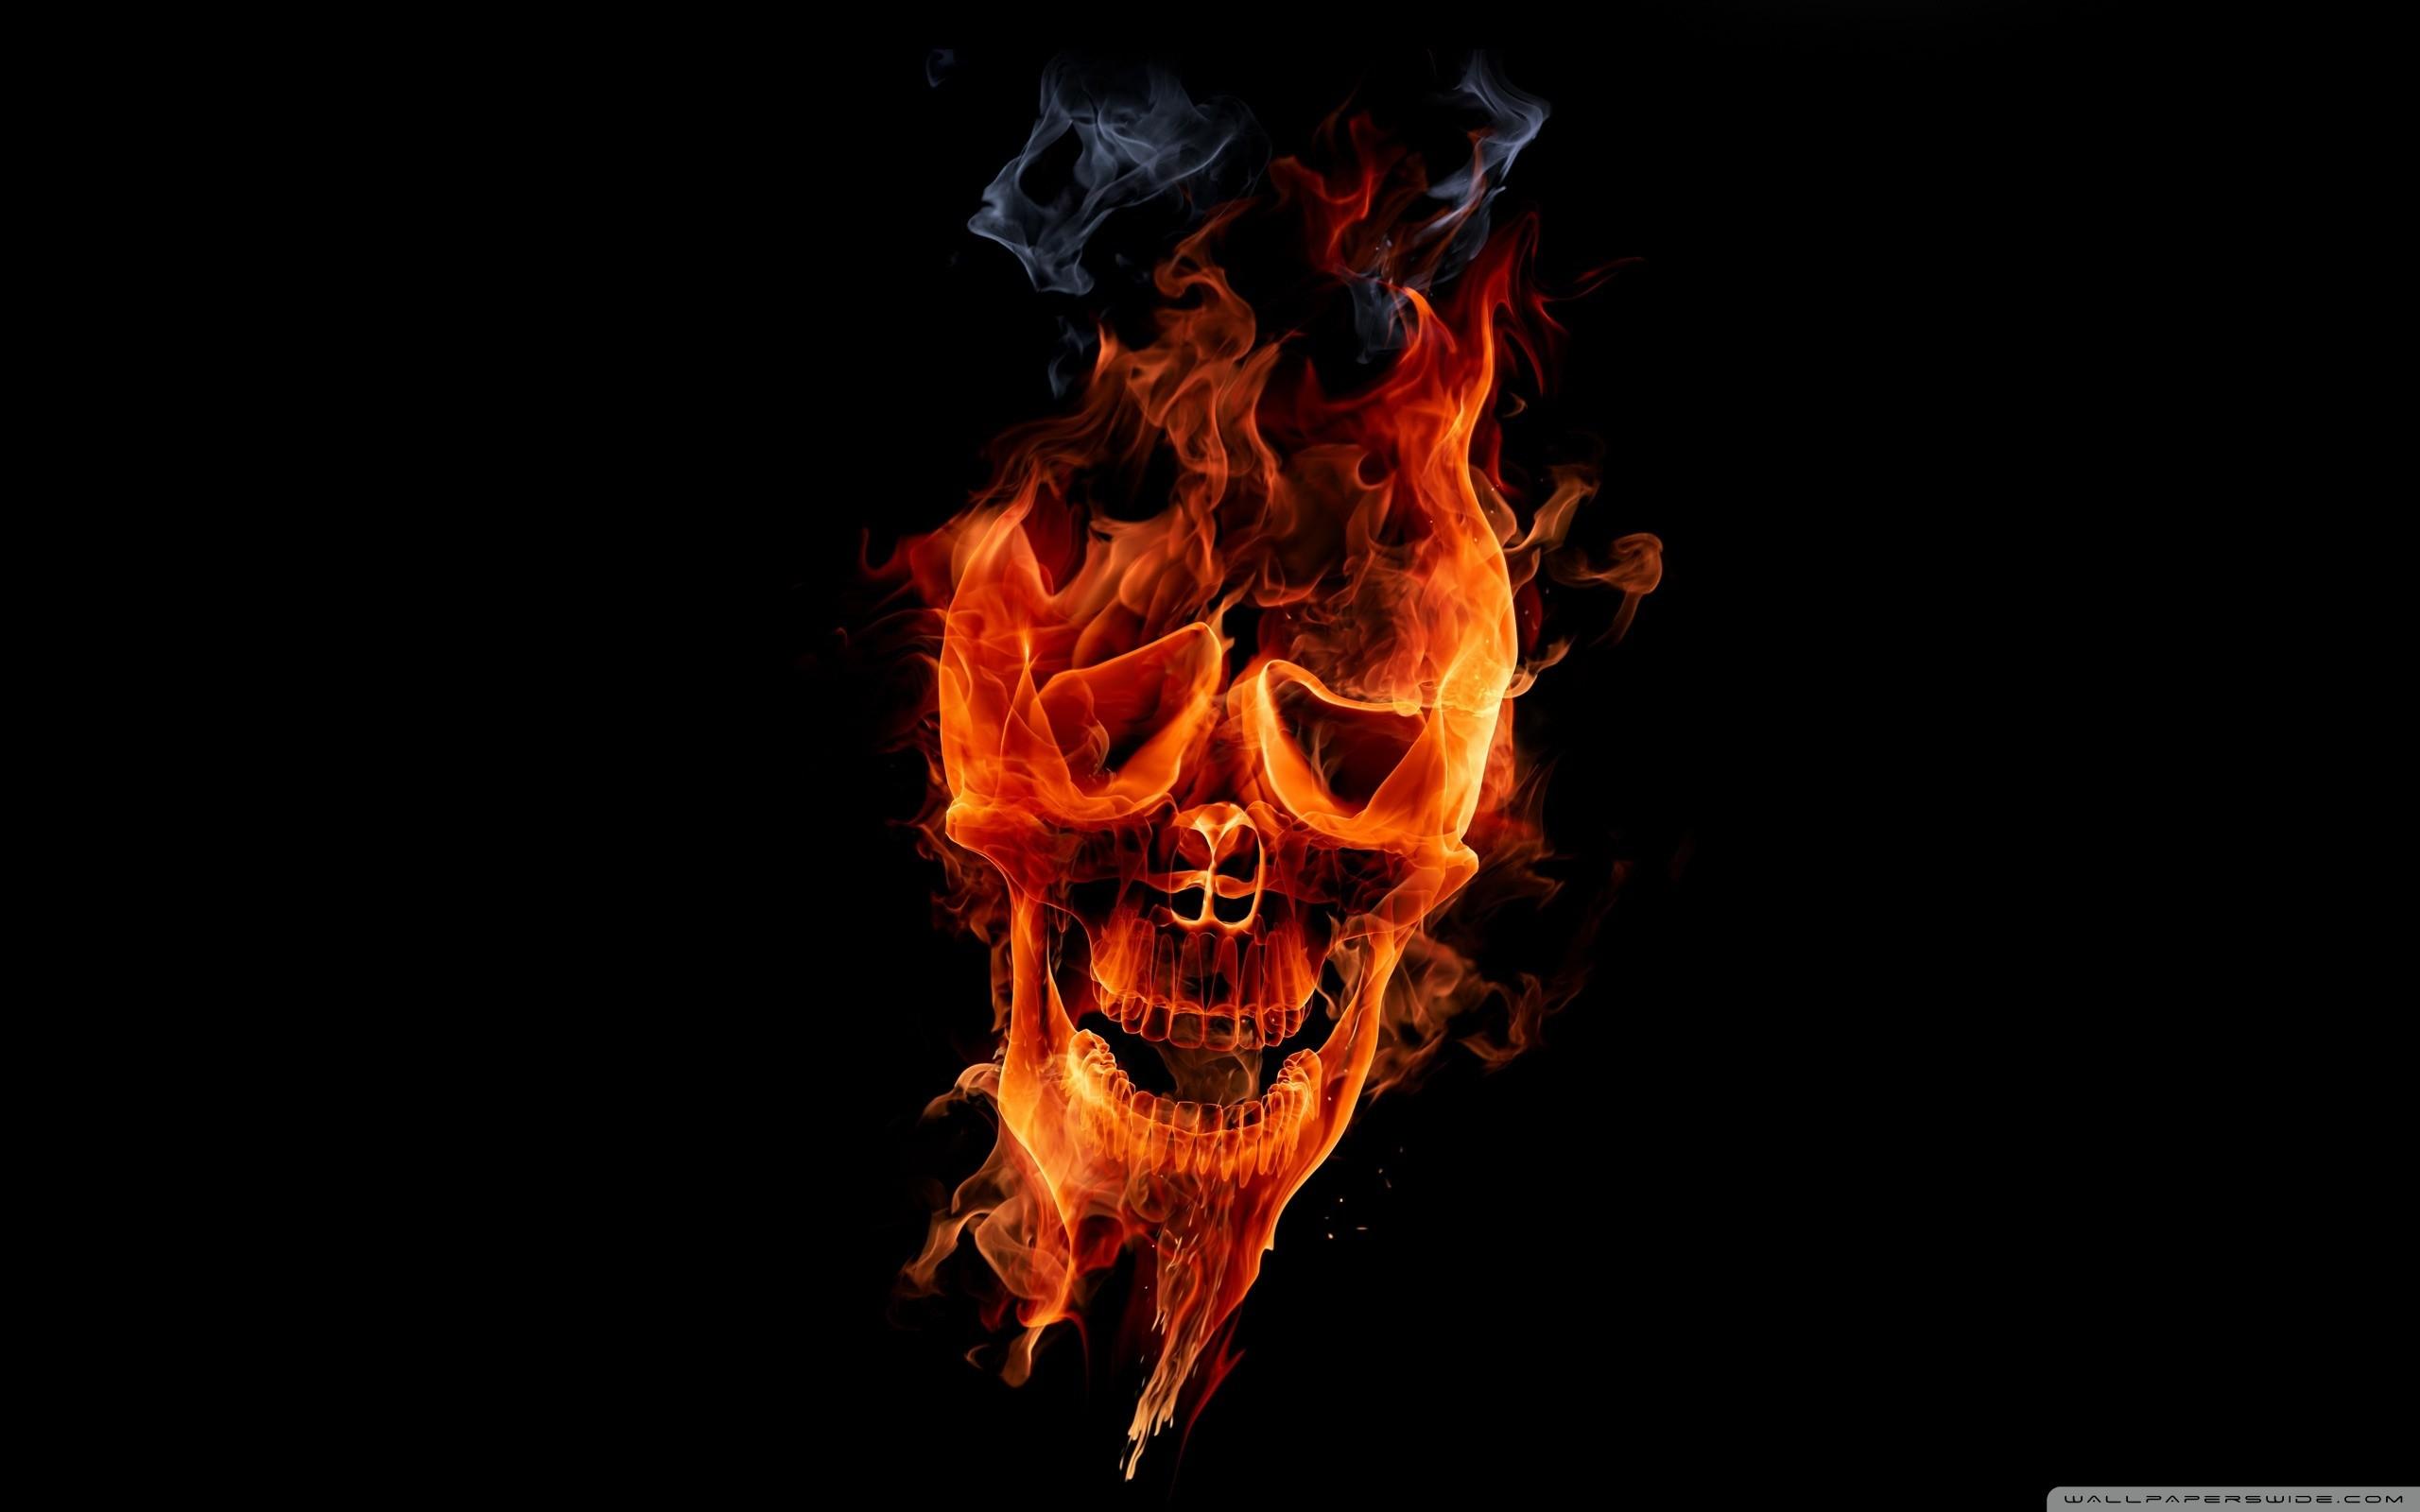 Skull and Flame Wallpaper